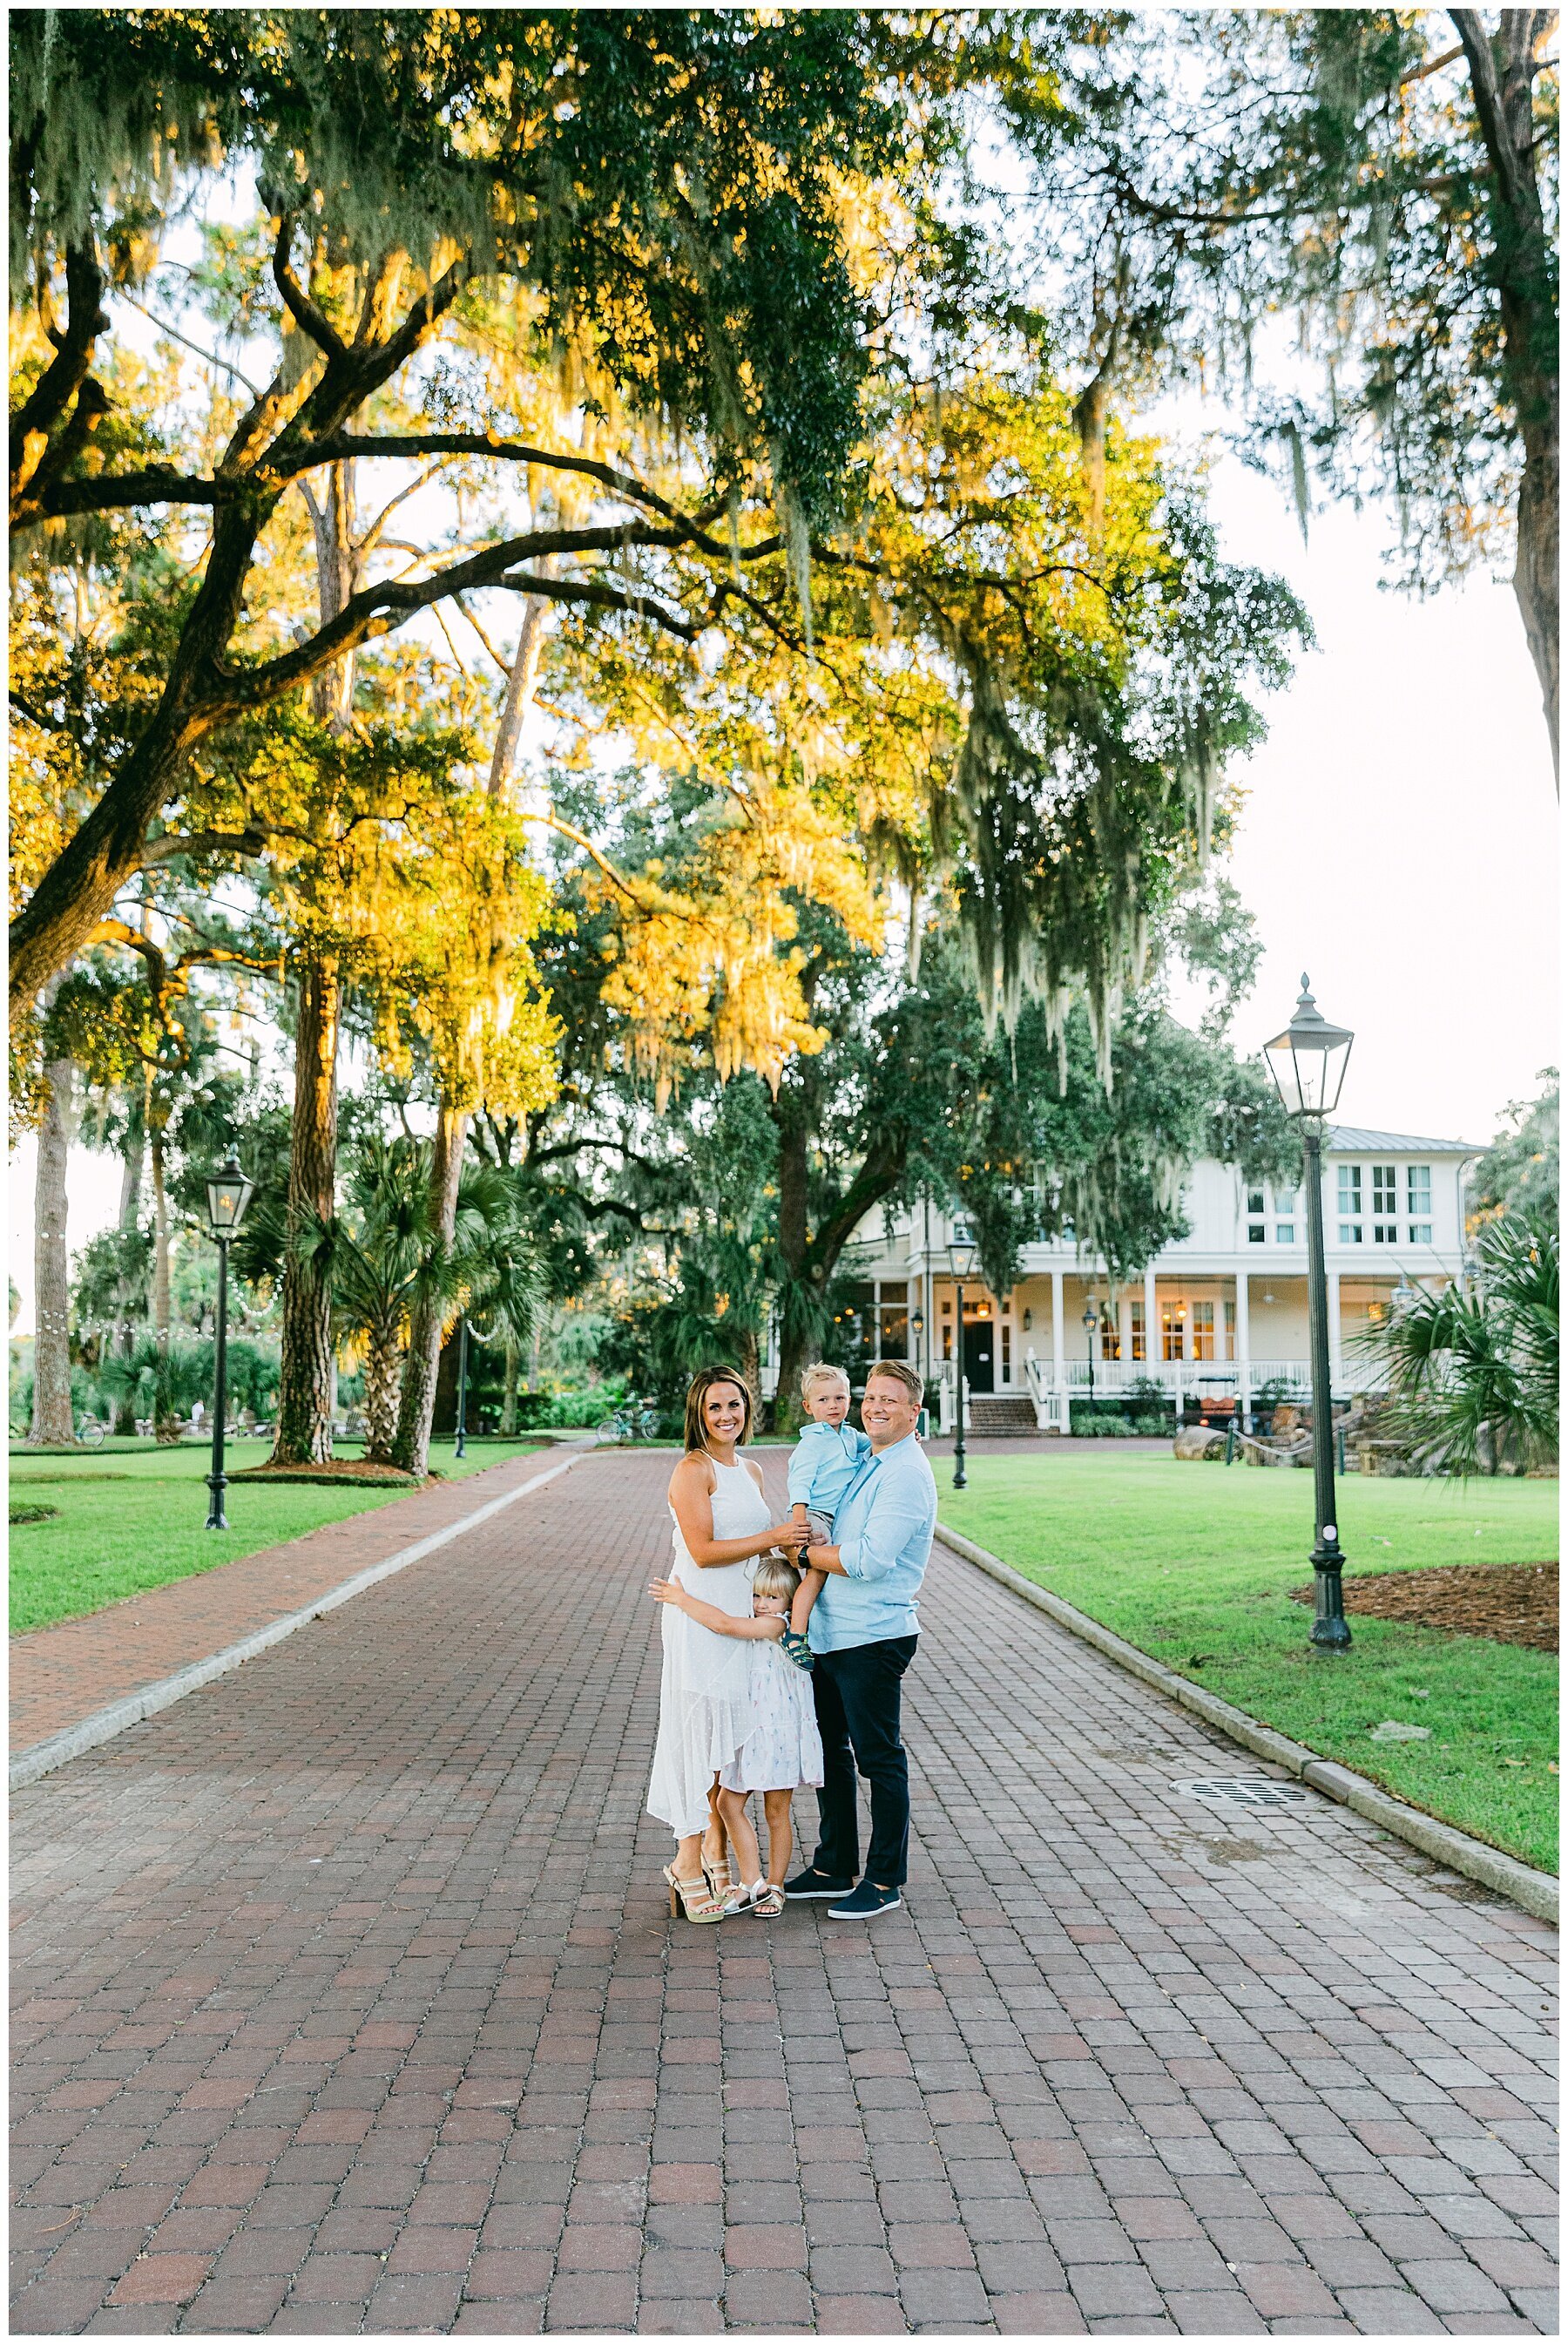 Katherine_Ives_Photography_Mcmillen_Montage_Palmetto_Bluff_51.jpg